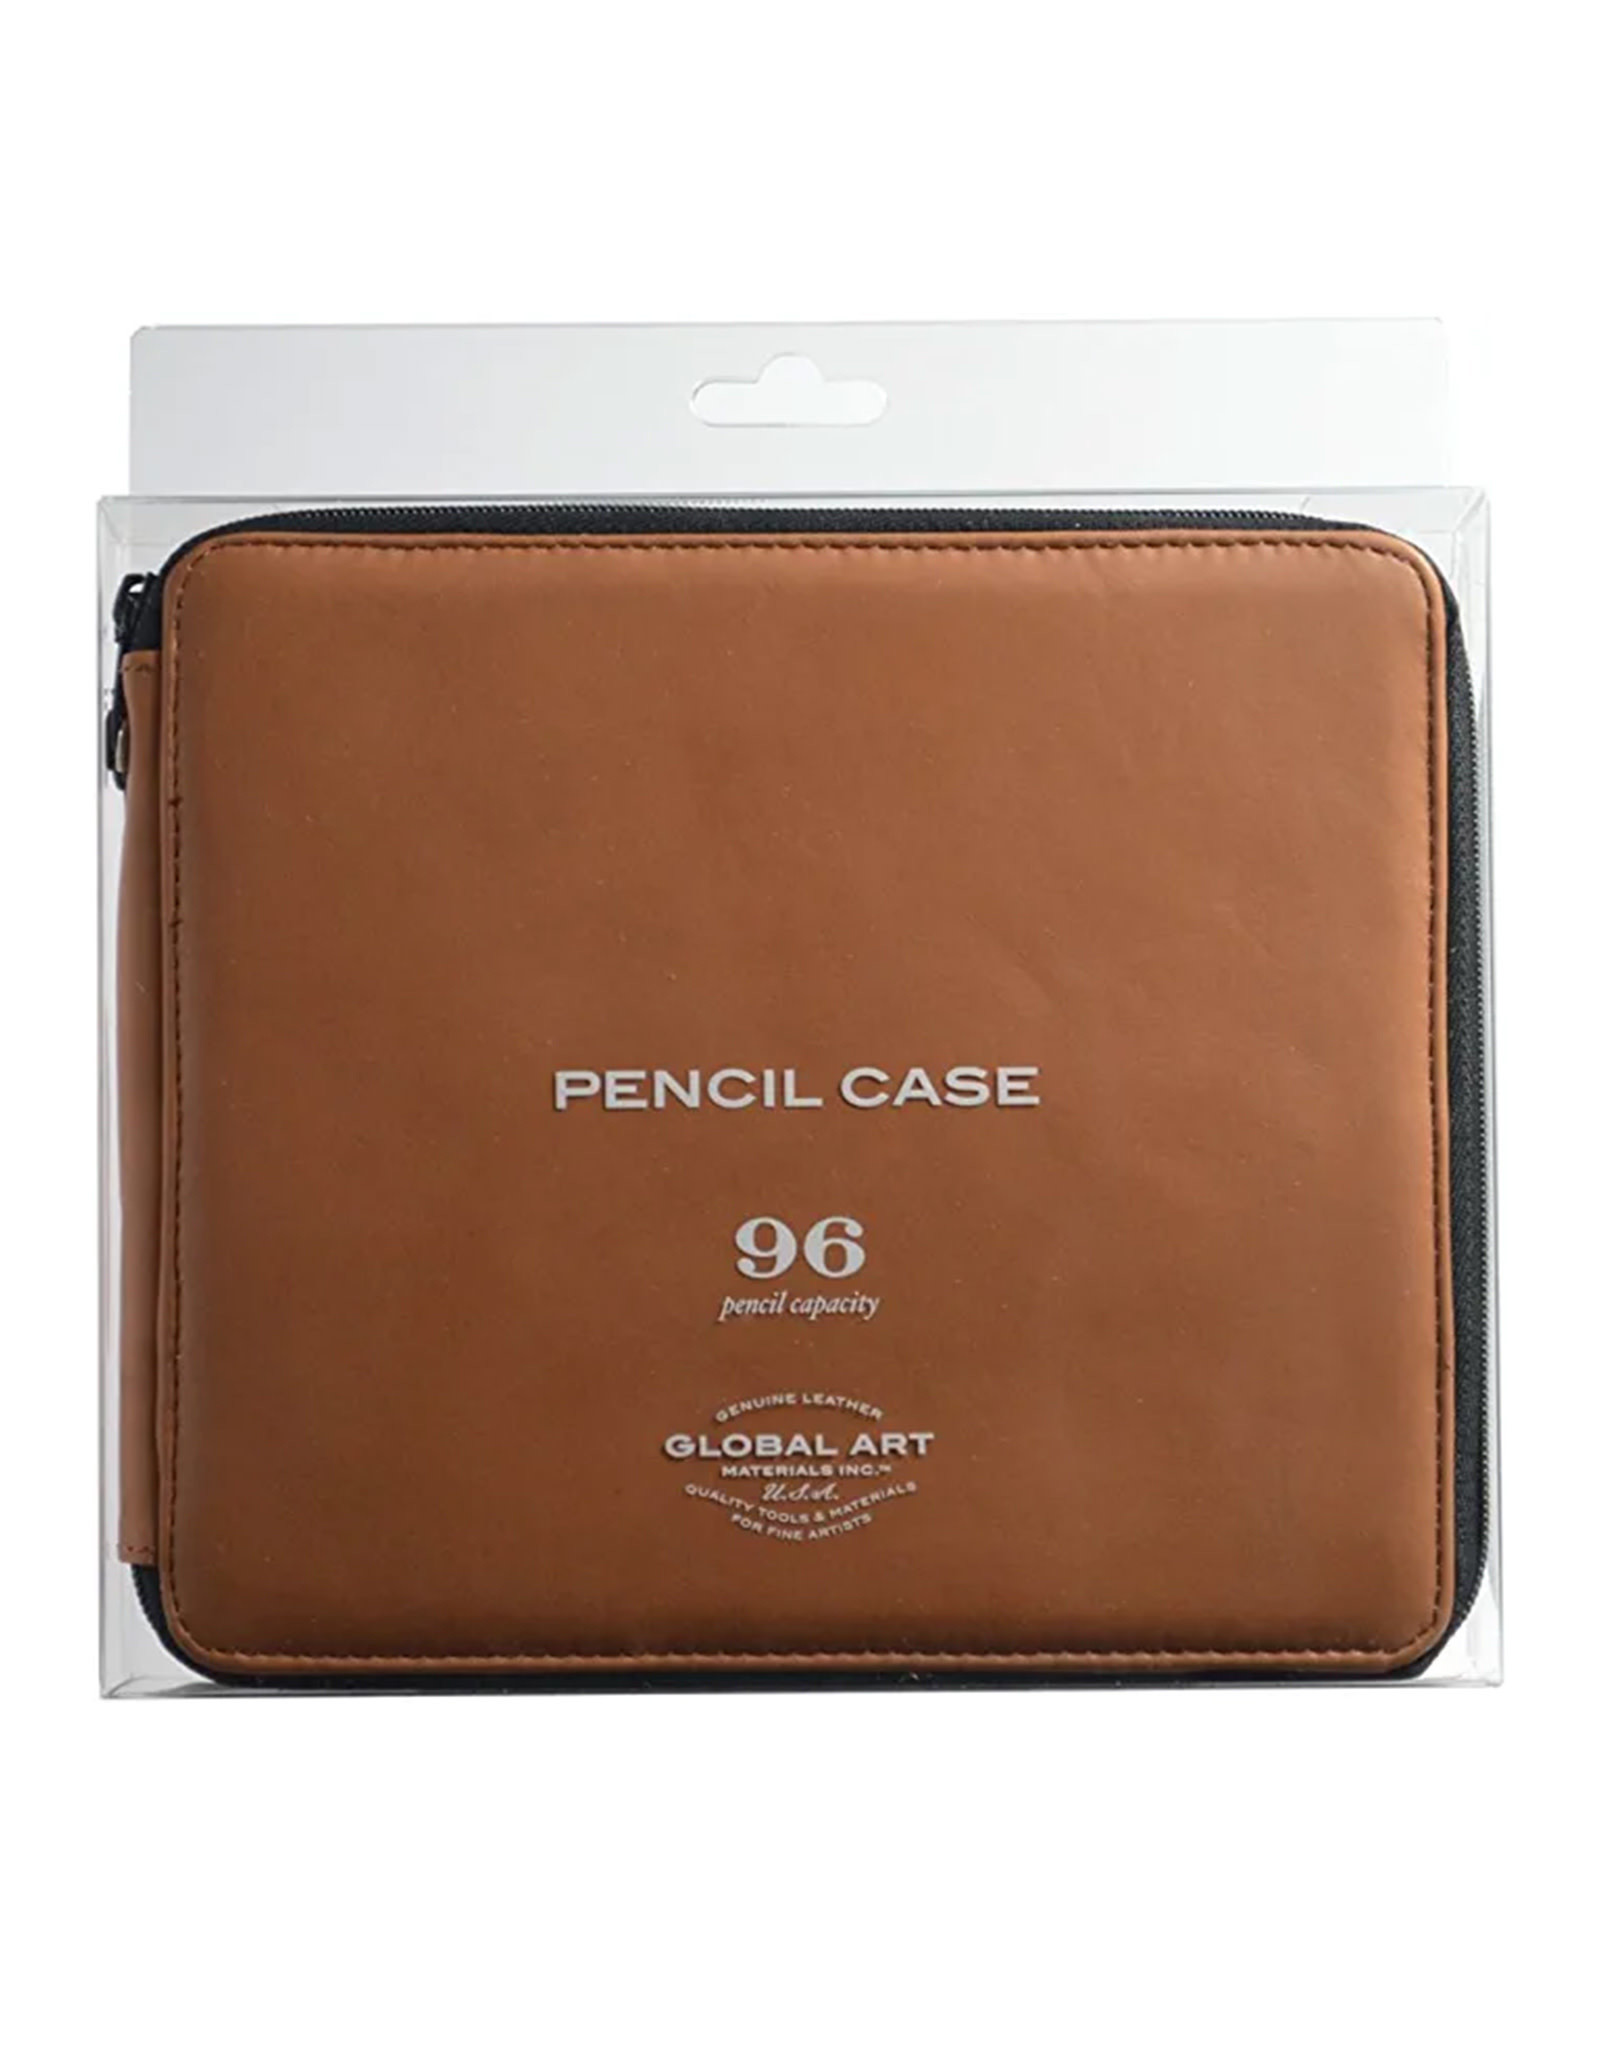 Global Art Pencil Case, Genuine Leather, Brown, 96 Pencils - The